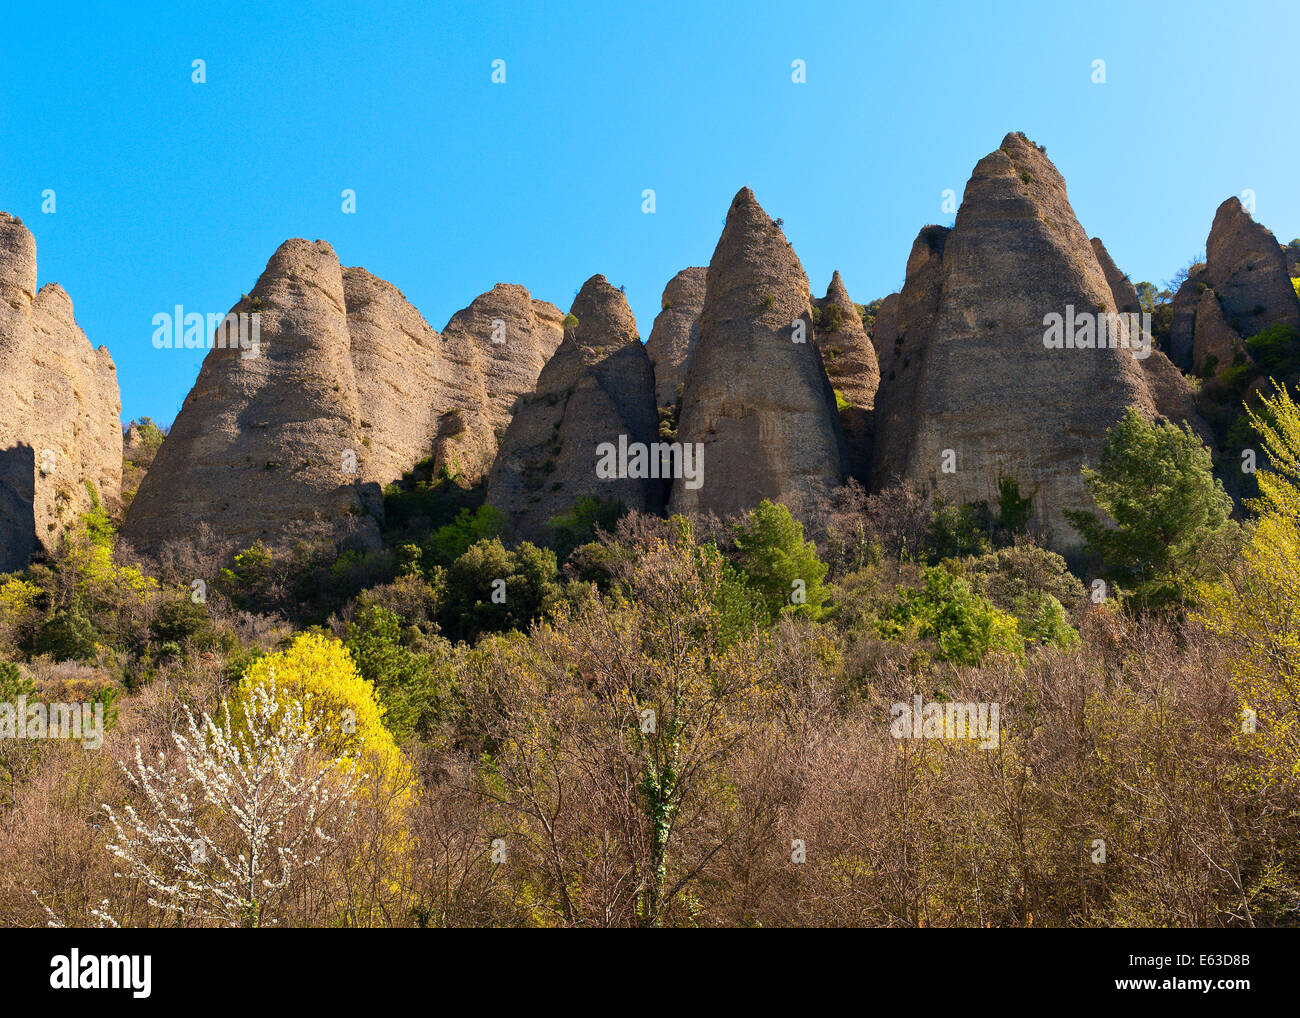 Near Les Mees, in Provence, France, are some unusual rock formations known as 'Les Penitents'. Stock Photo